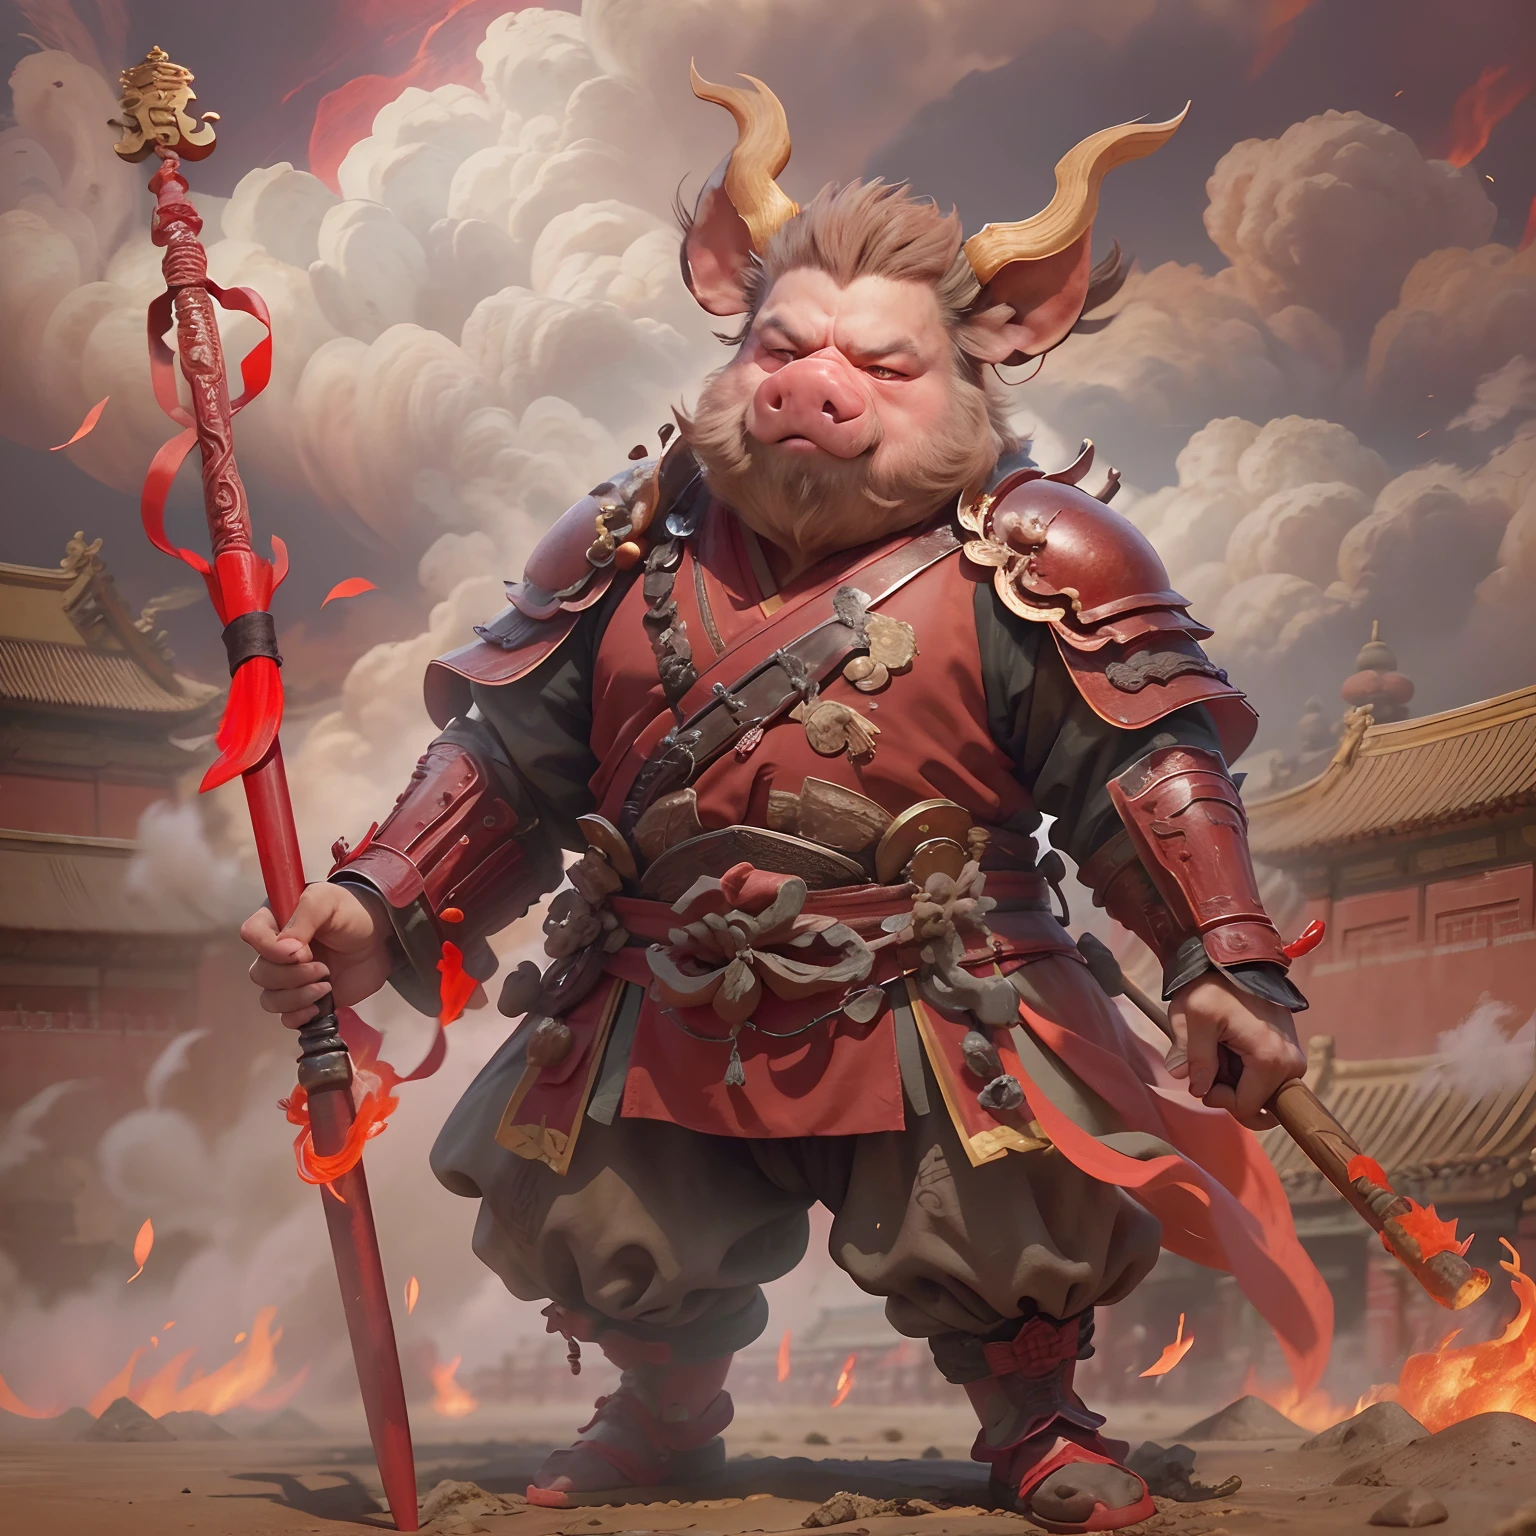 1 Pig-headed man，Zhu Bajie held a nail rake，((Complete nail rake)),Put on the flame armoghting posture，Red ribbon，Clouds of flame under your feet,tmasterpiece，((The background is the Forbidden City, Oriental ancient city))，Cloud fog，8K，high definition resolution，Detailed detail drawing，very photoreal，